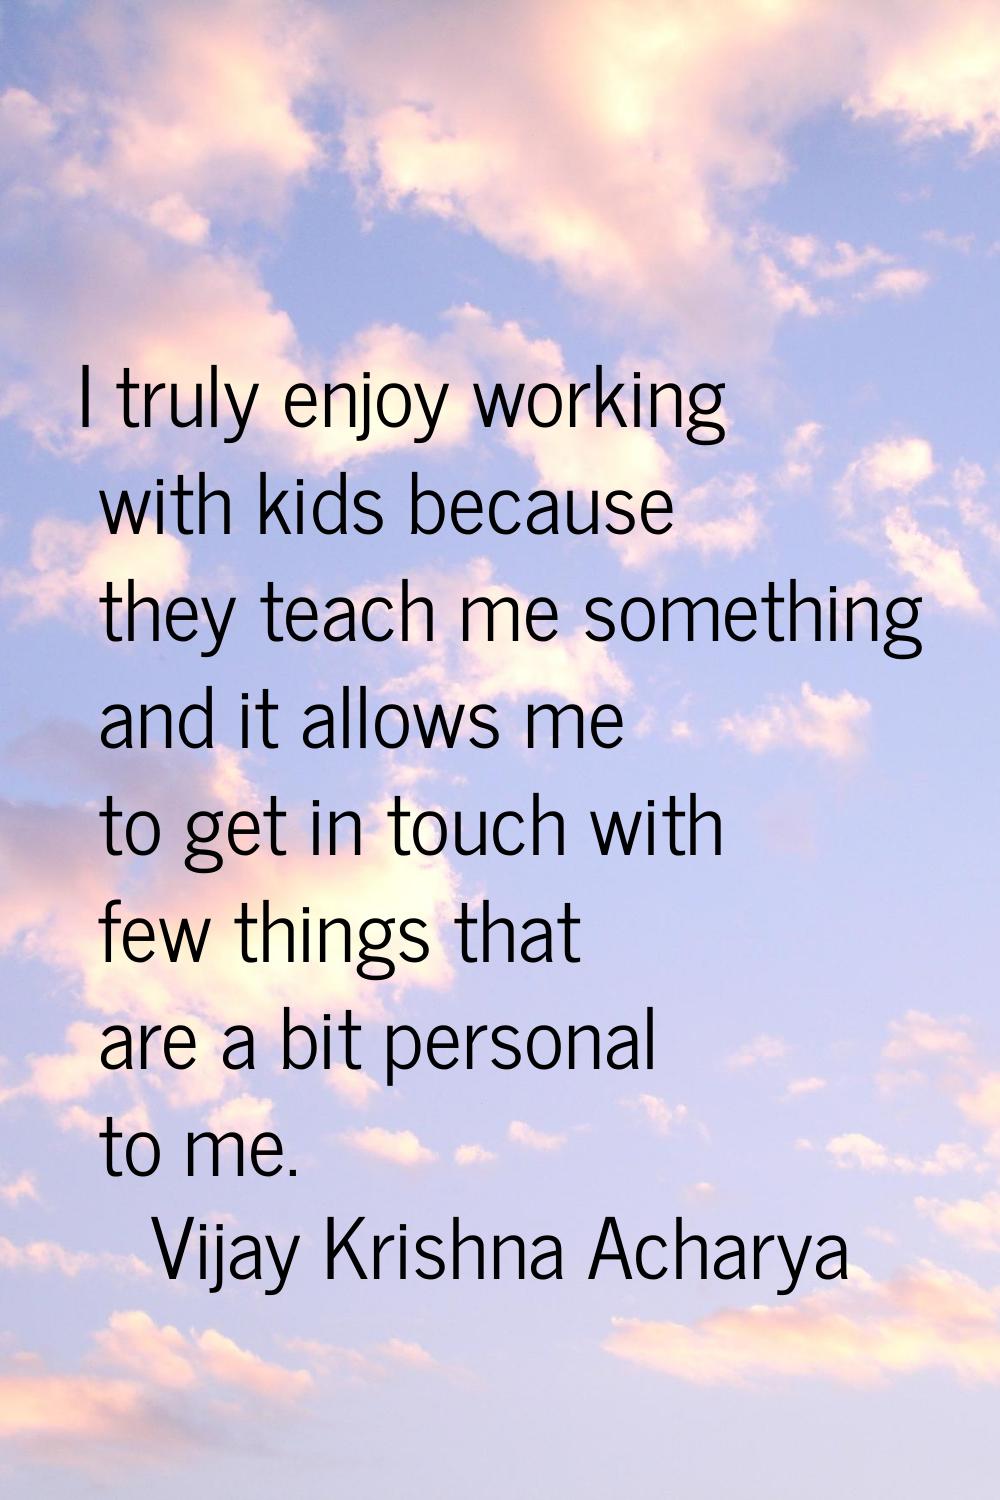 I truly enjoy working with kids because they teach me something and it allows me to get in touch wi